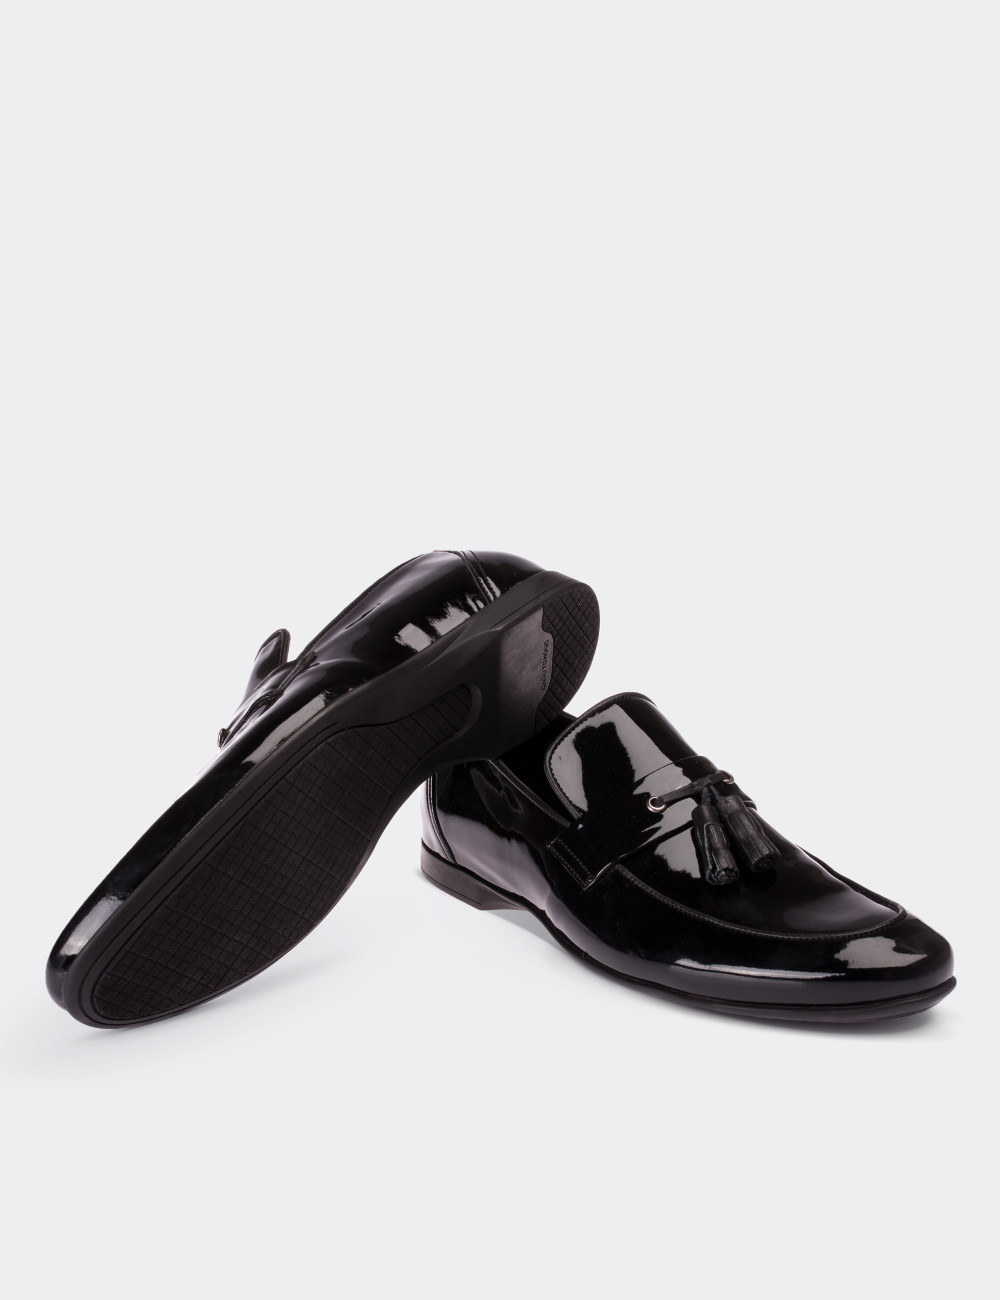 Black Patent Leather Loafers - 01537MSYHC01